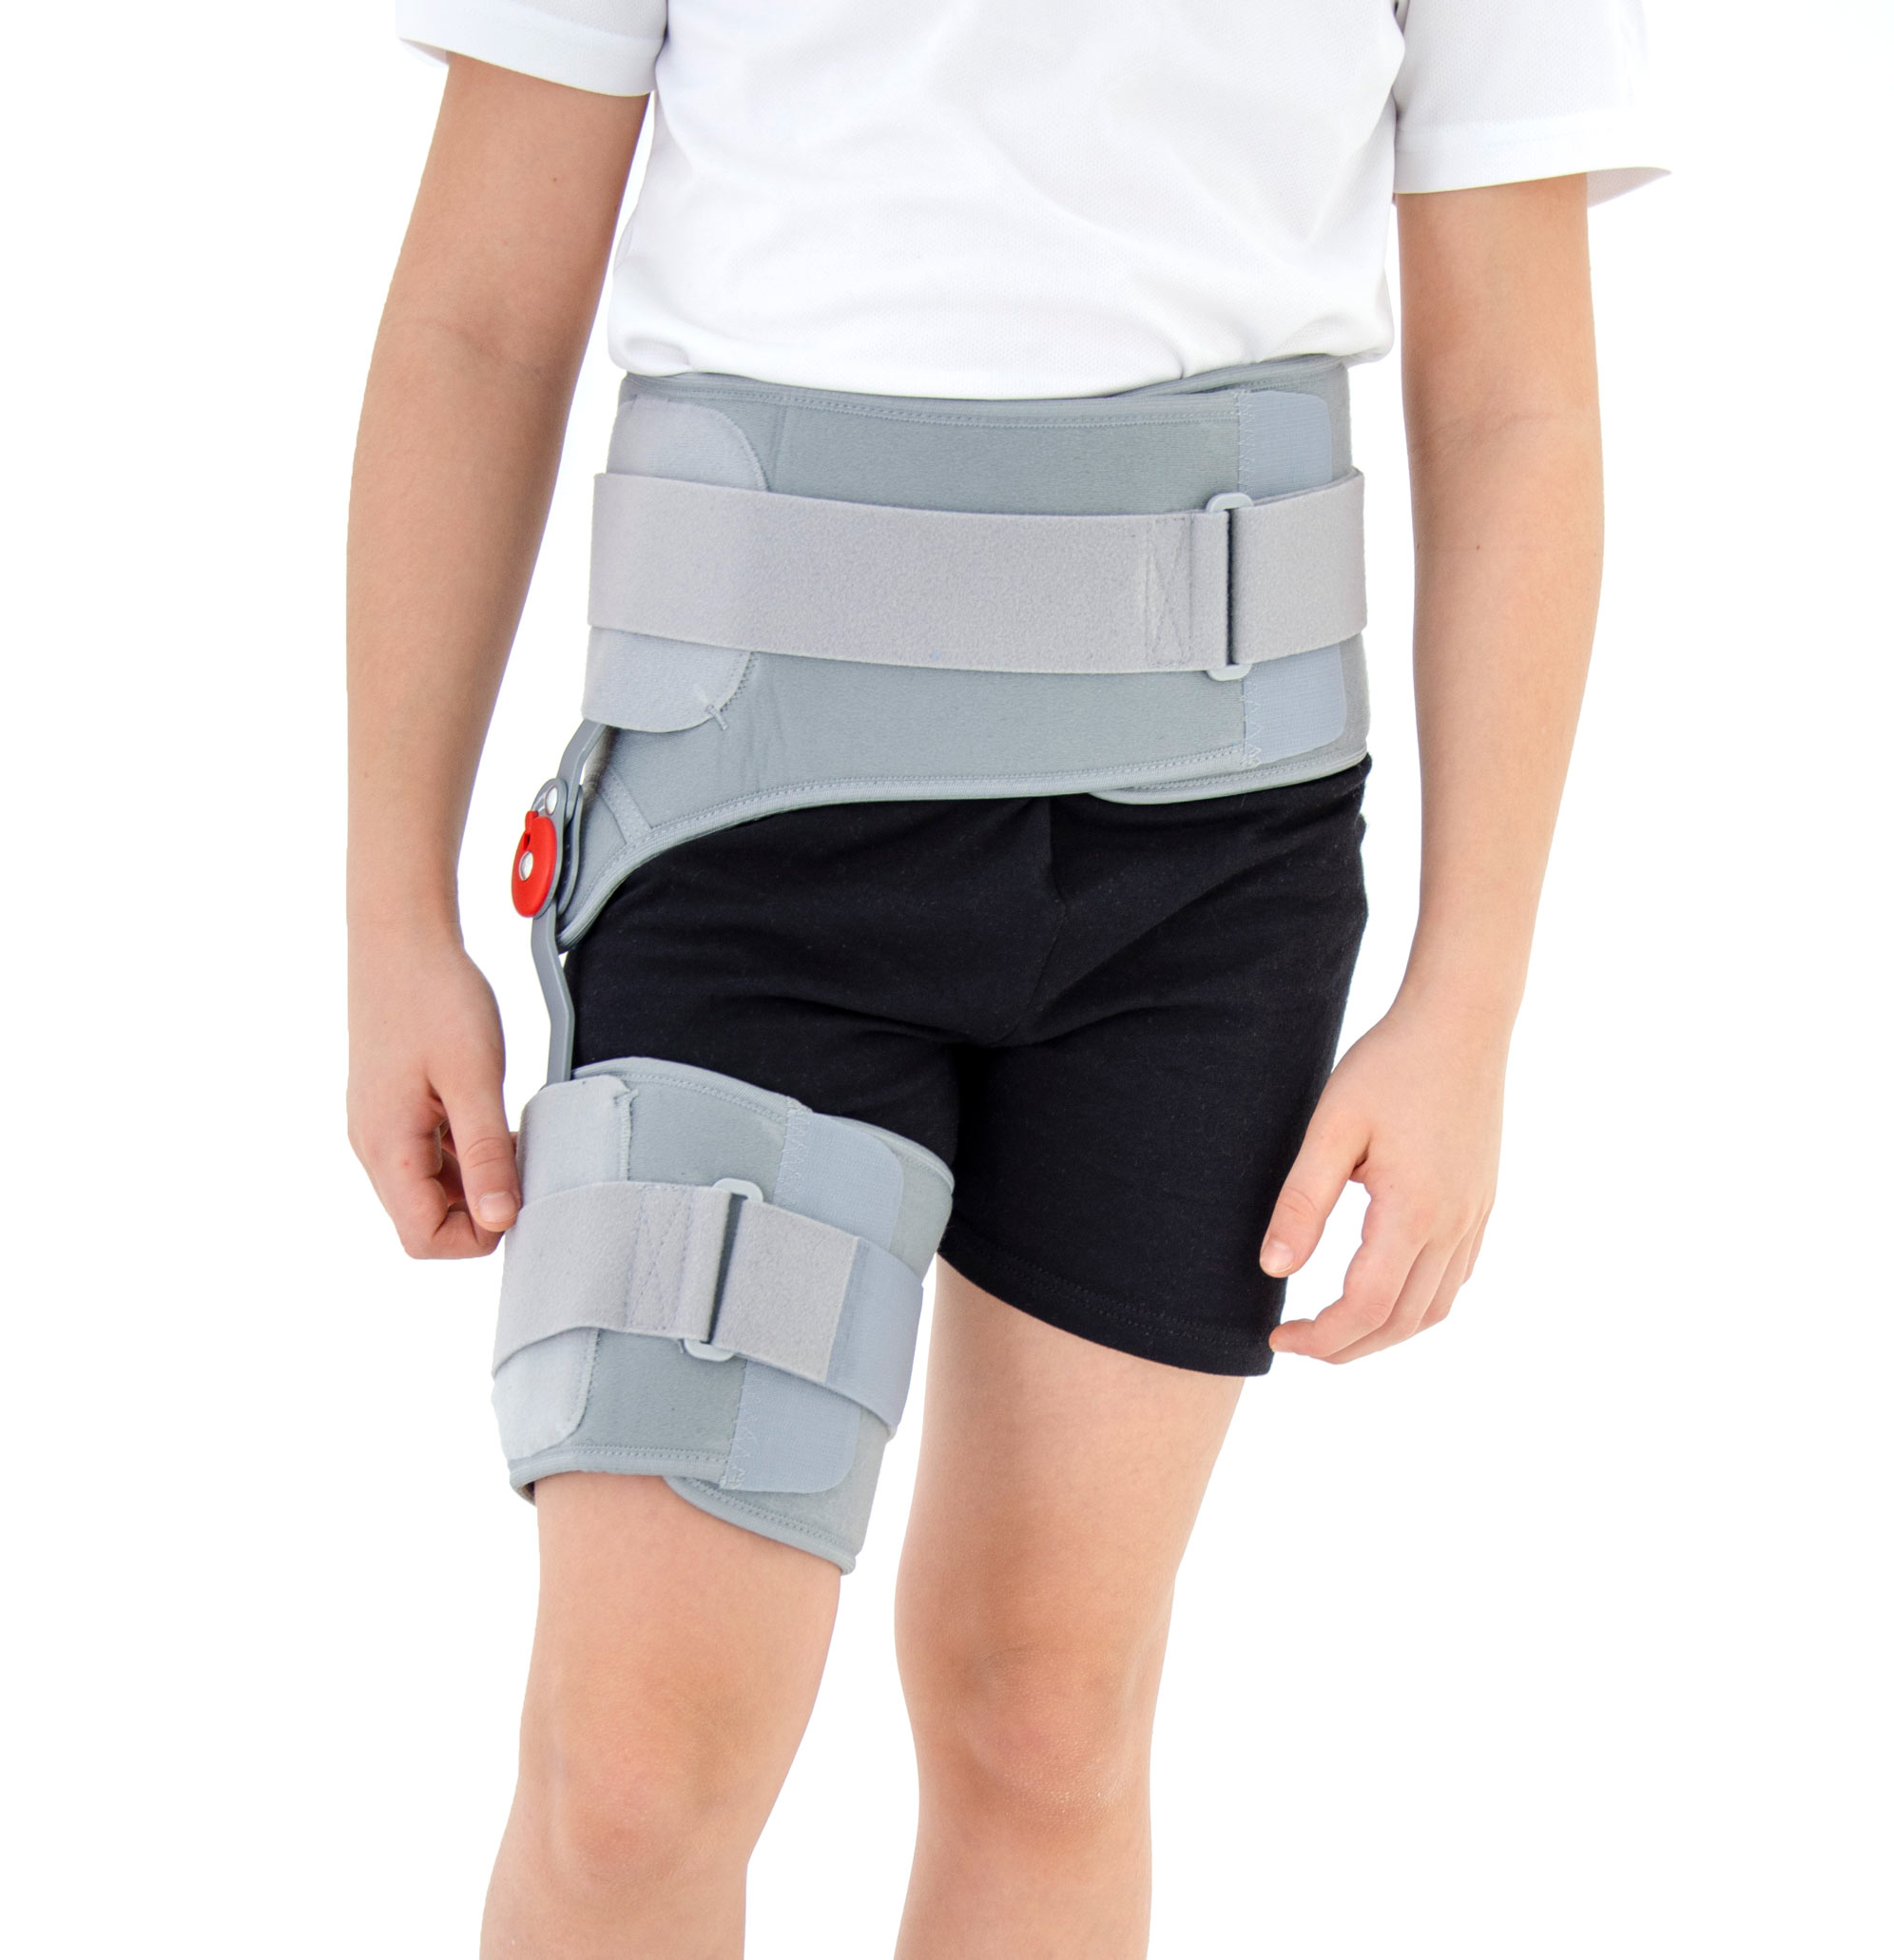 LOWER BACK BRACE AM-SO-02  Reh4Mat – lower limb orthosis and